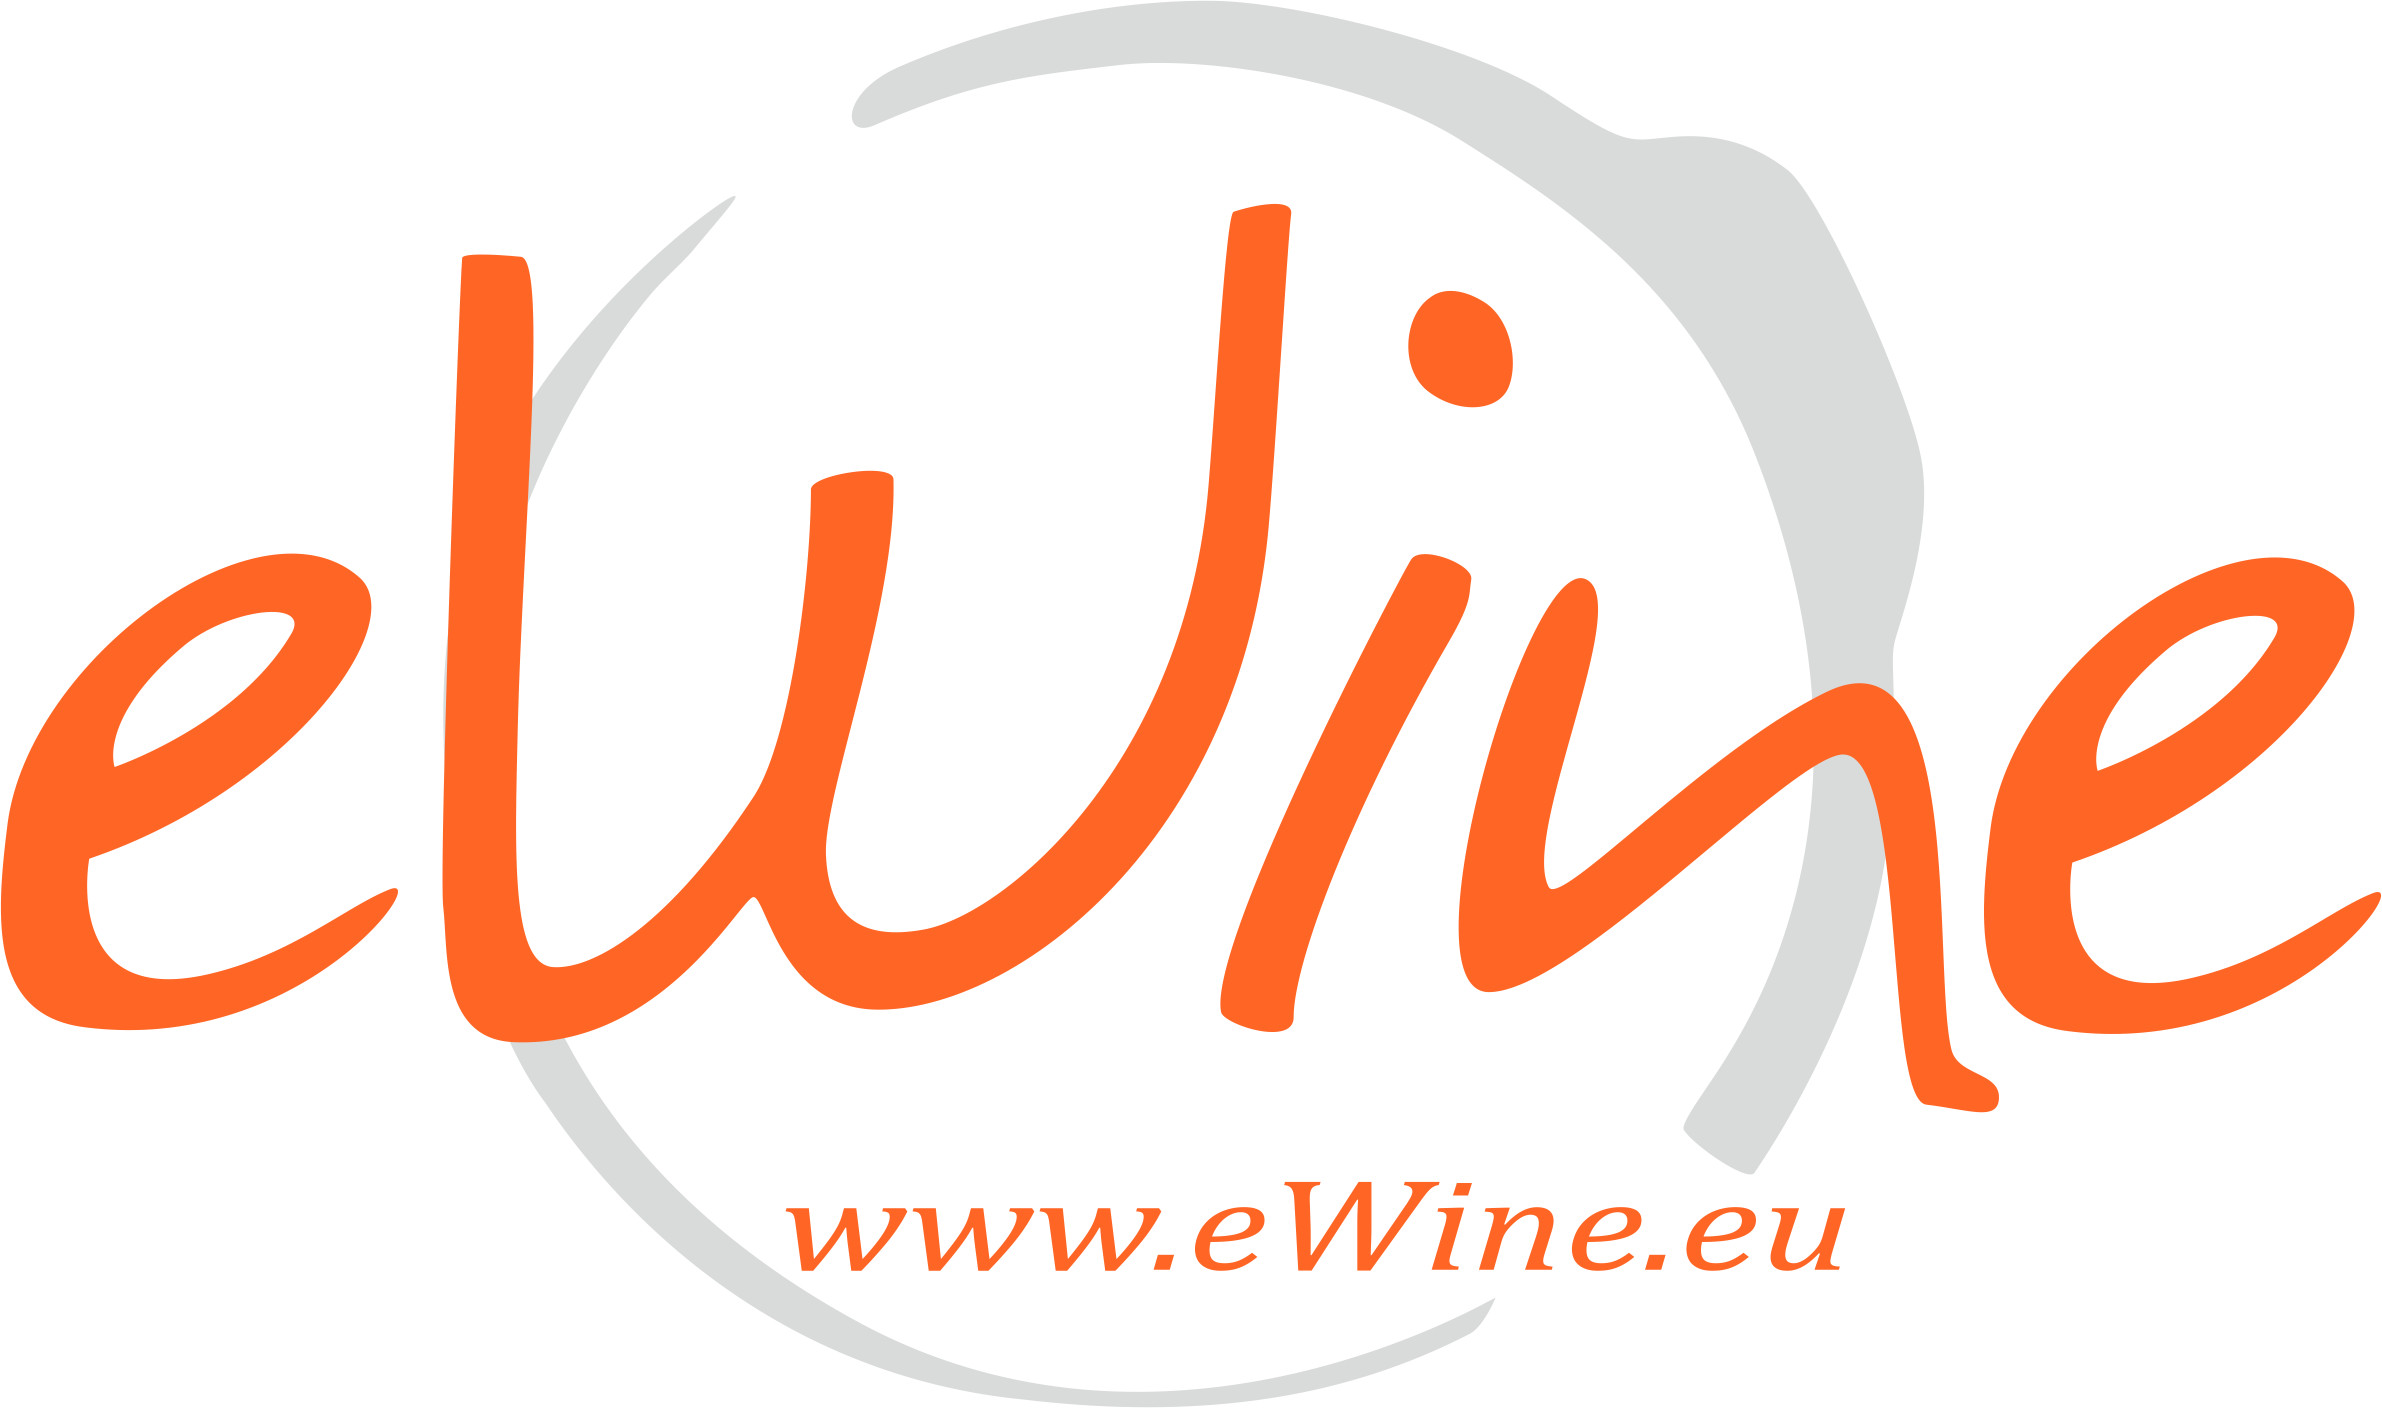 eWine-Your partner for good wines!